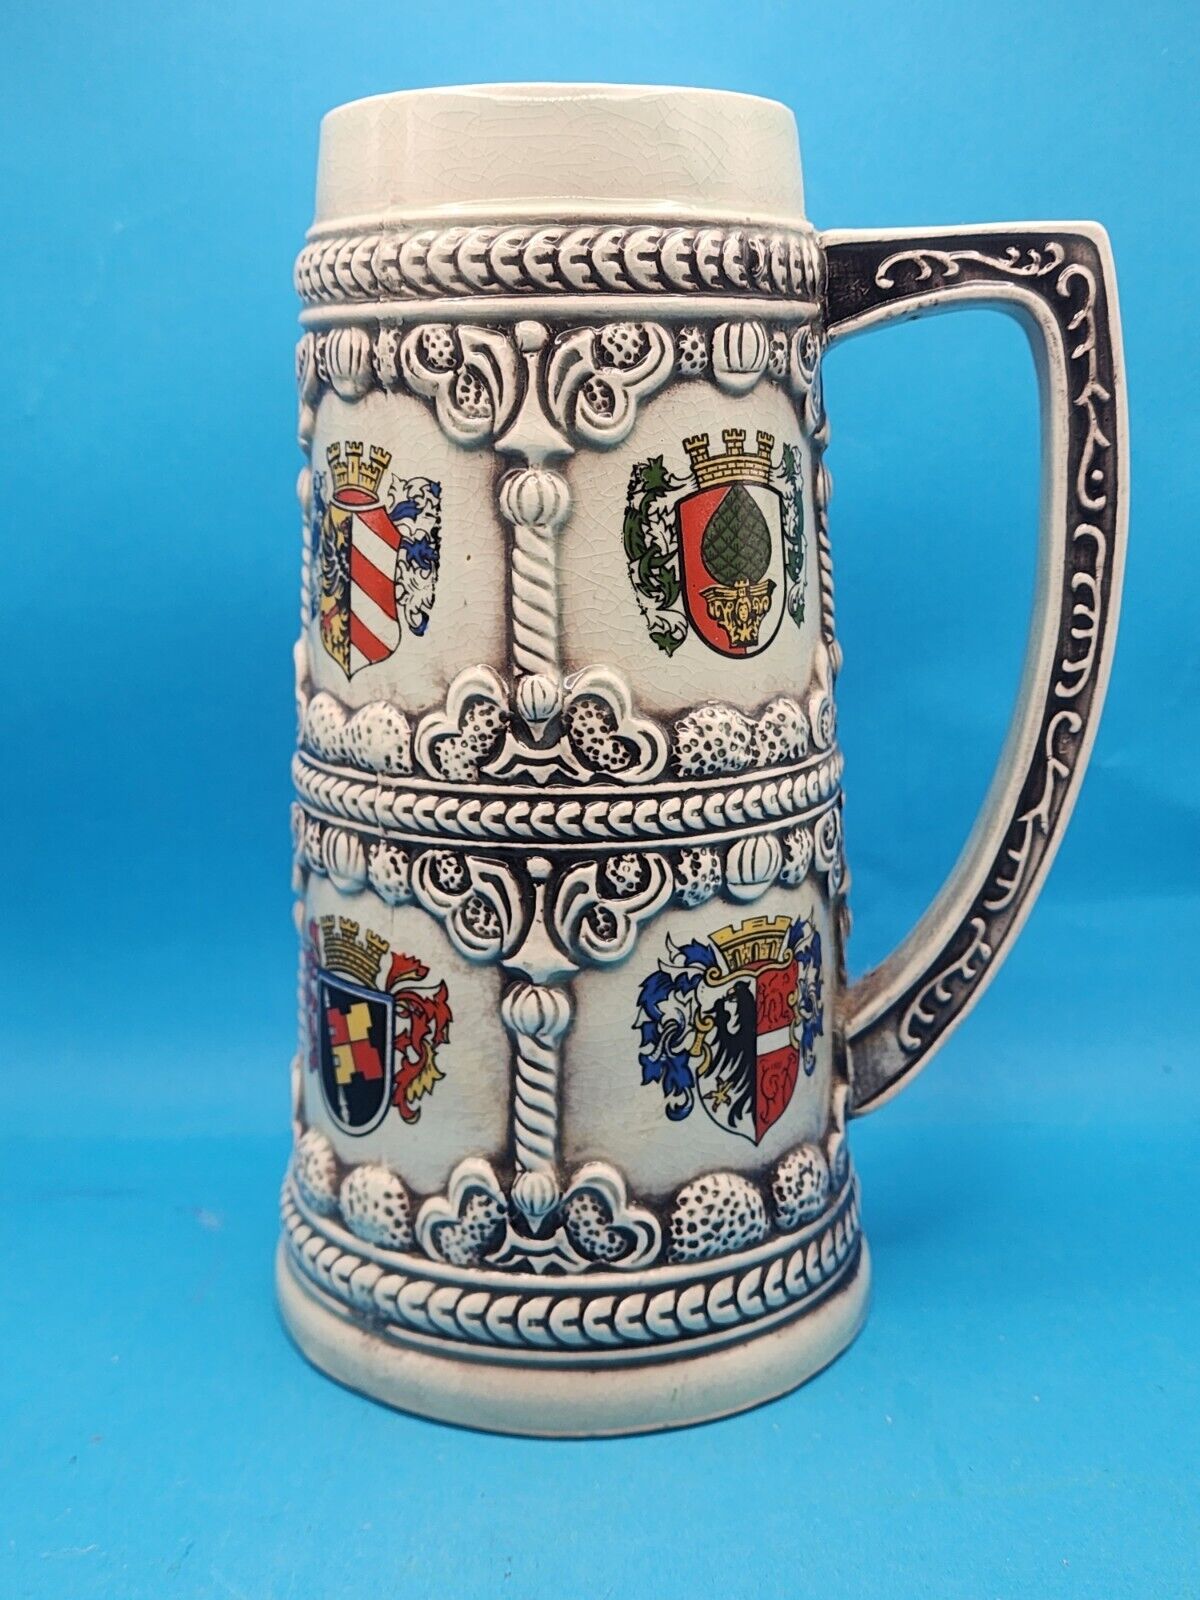 Vtg. German Coates of Arms Sheilds Apex Quality Beer Stein Tankard